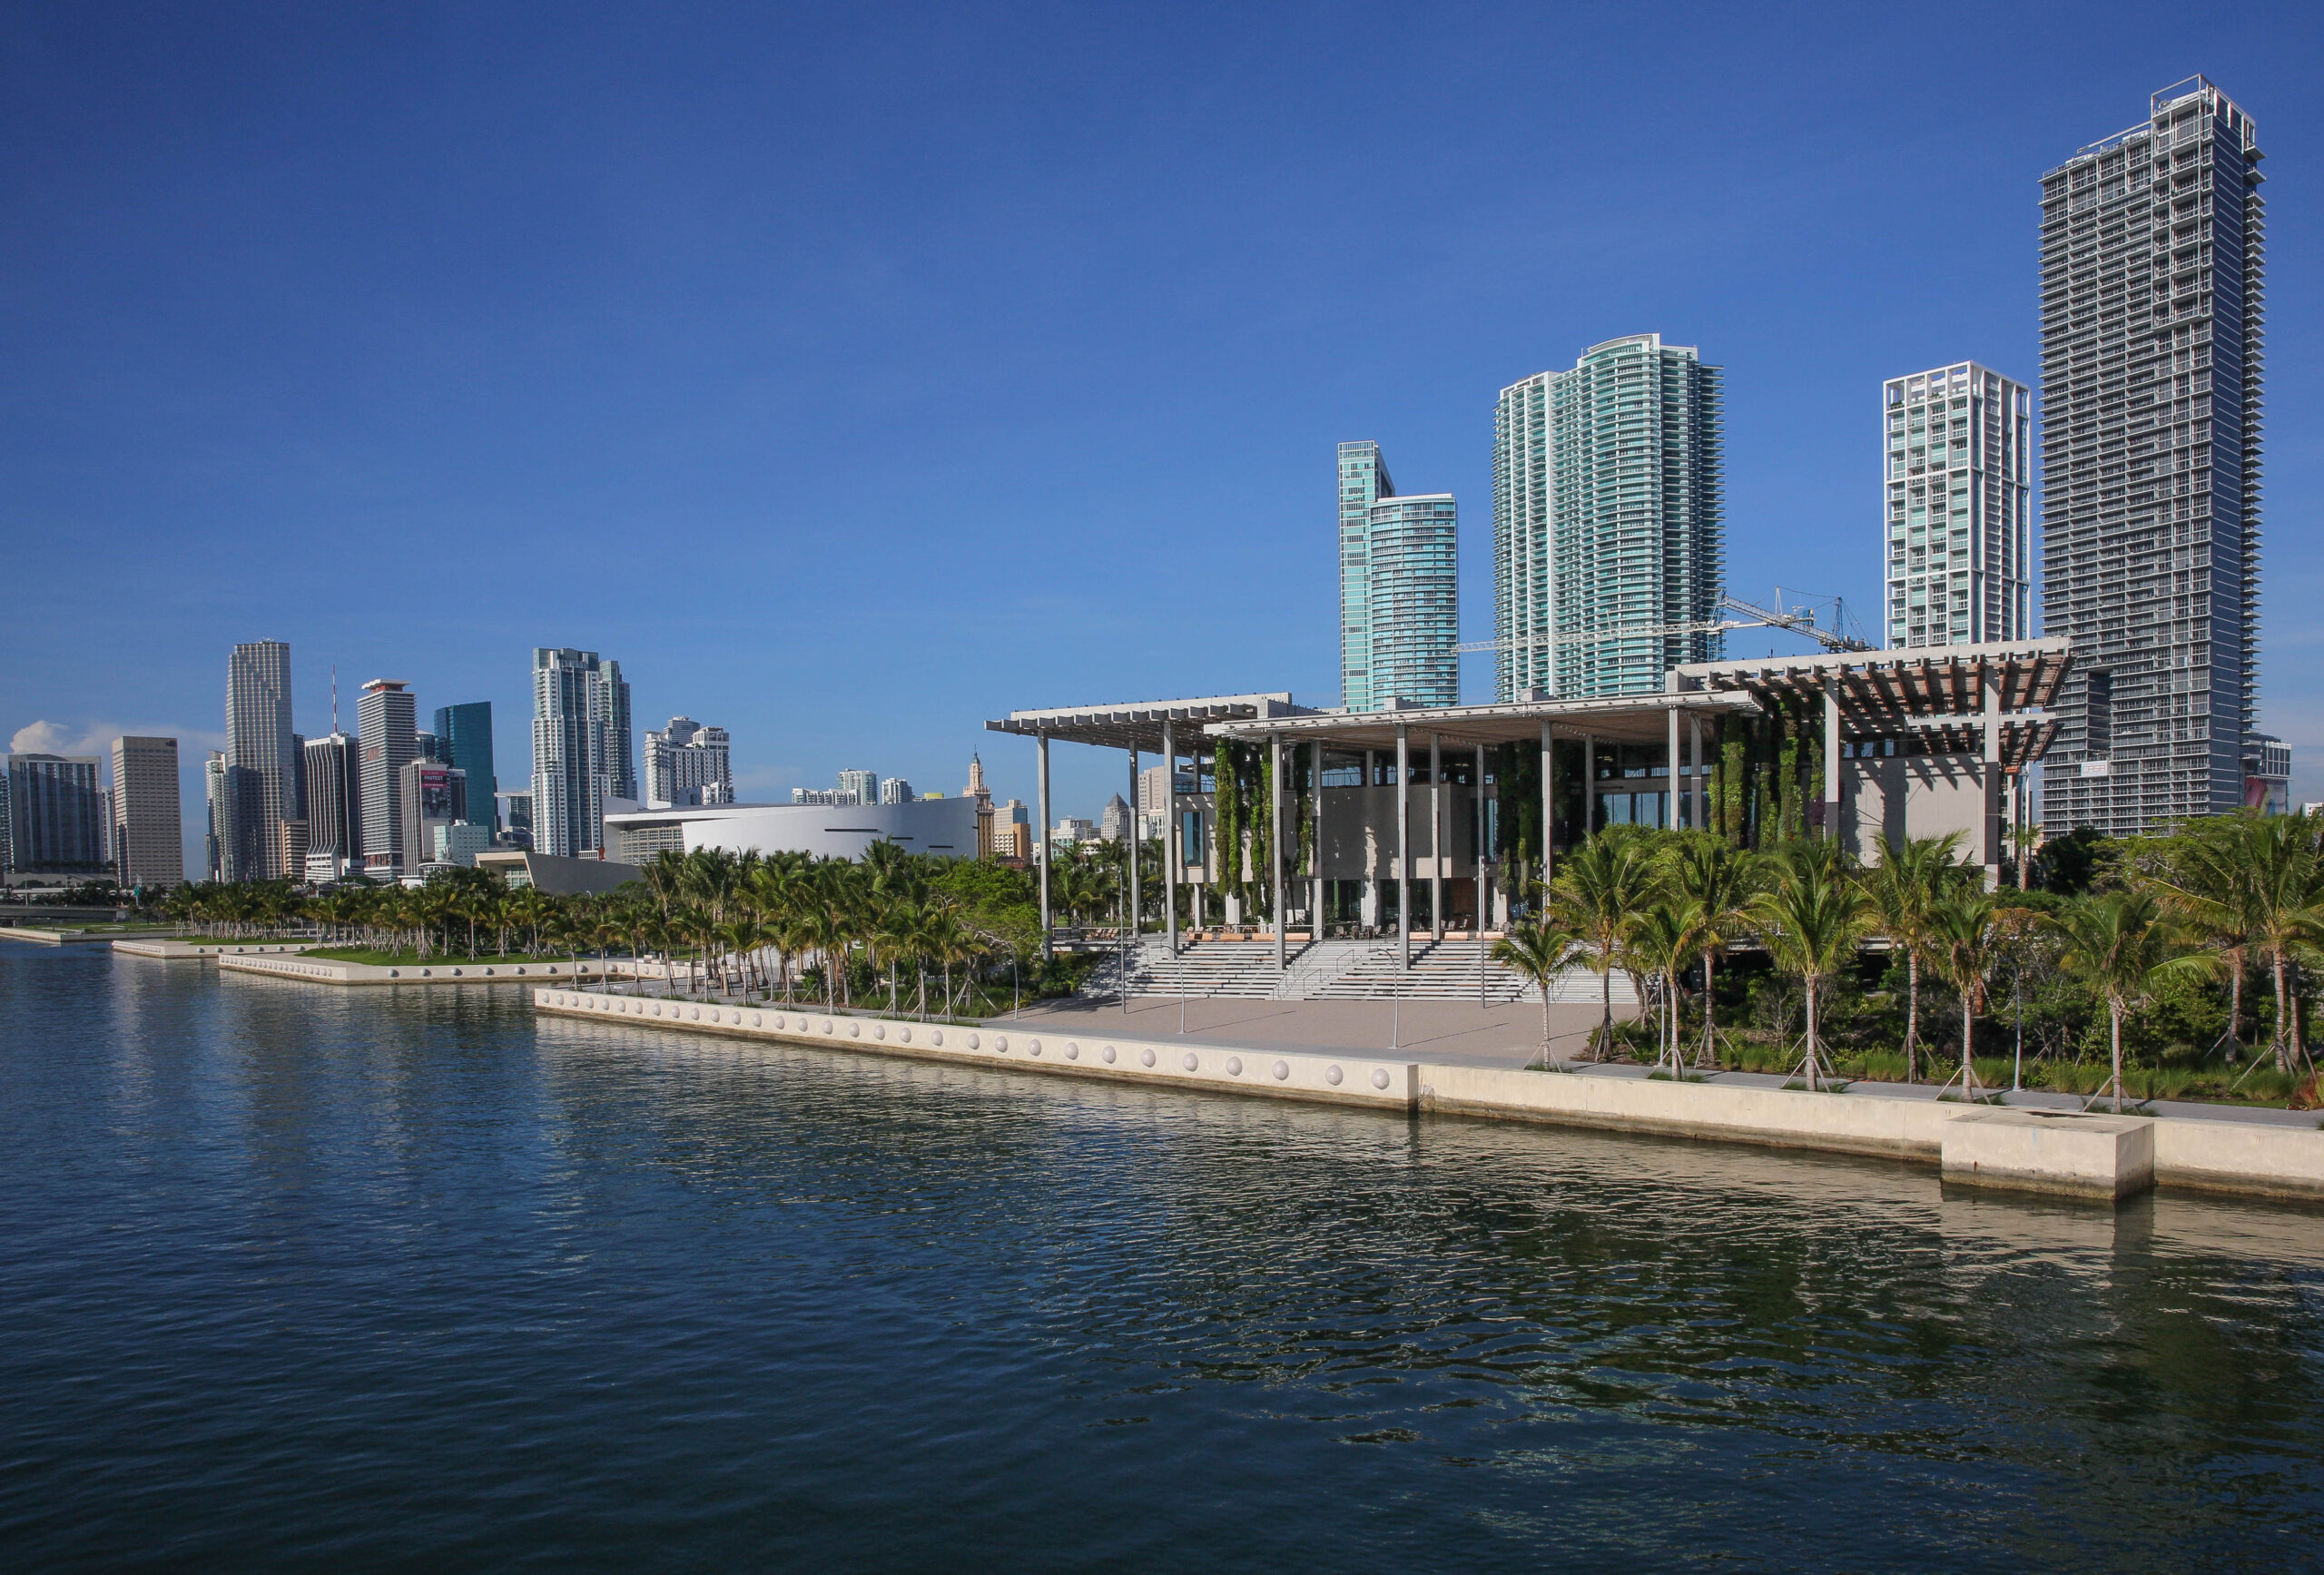 A building in front of water and several skyscrapers.